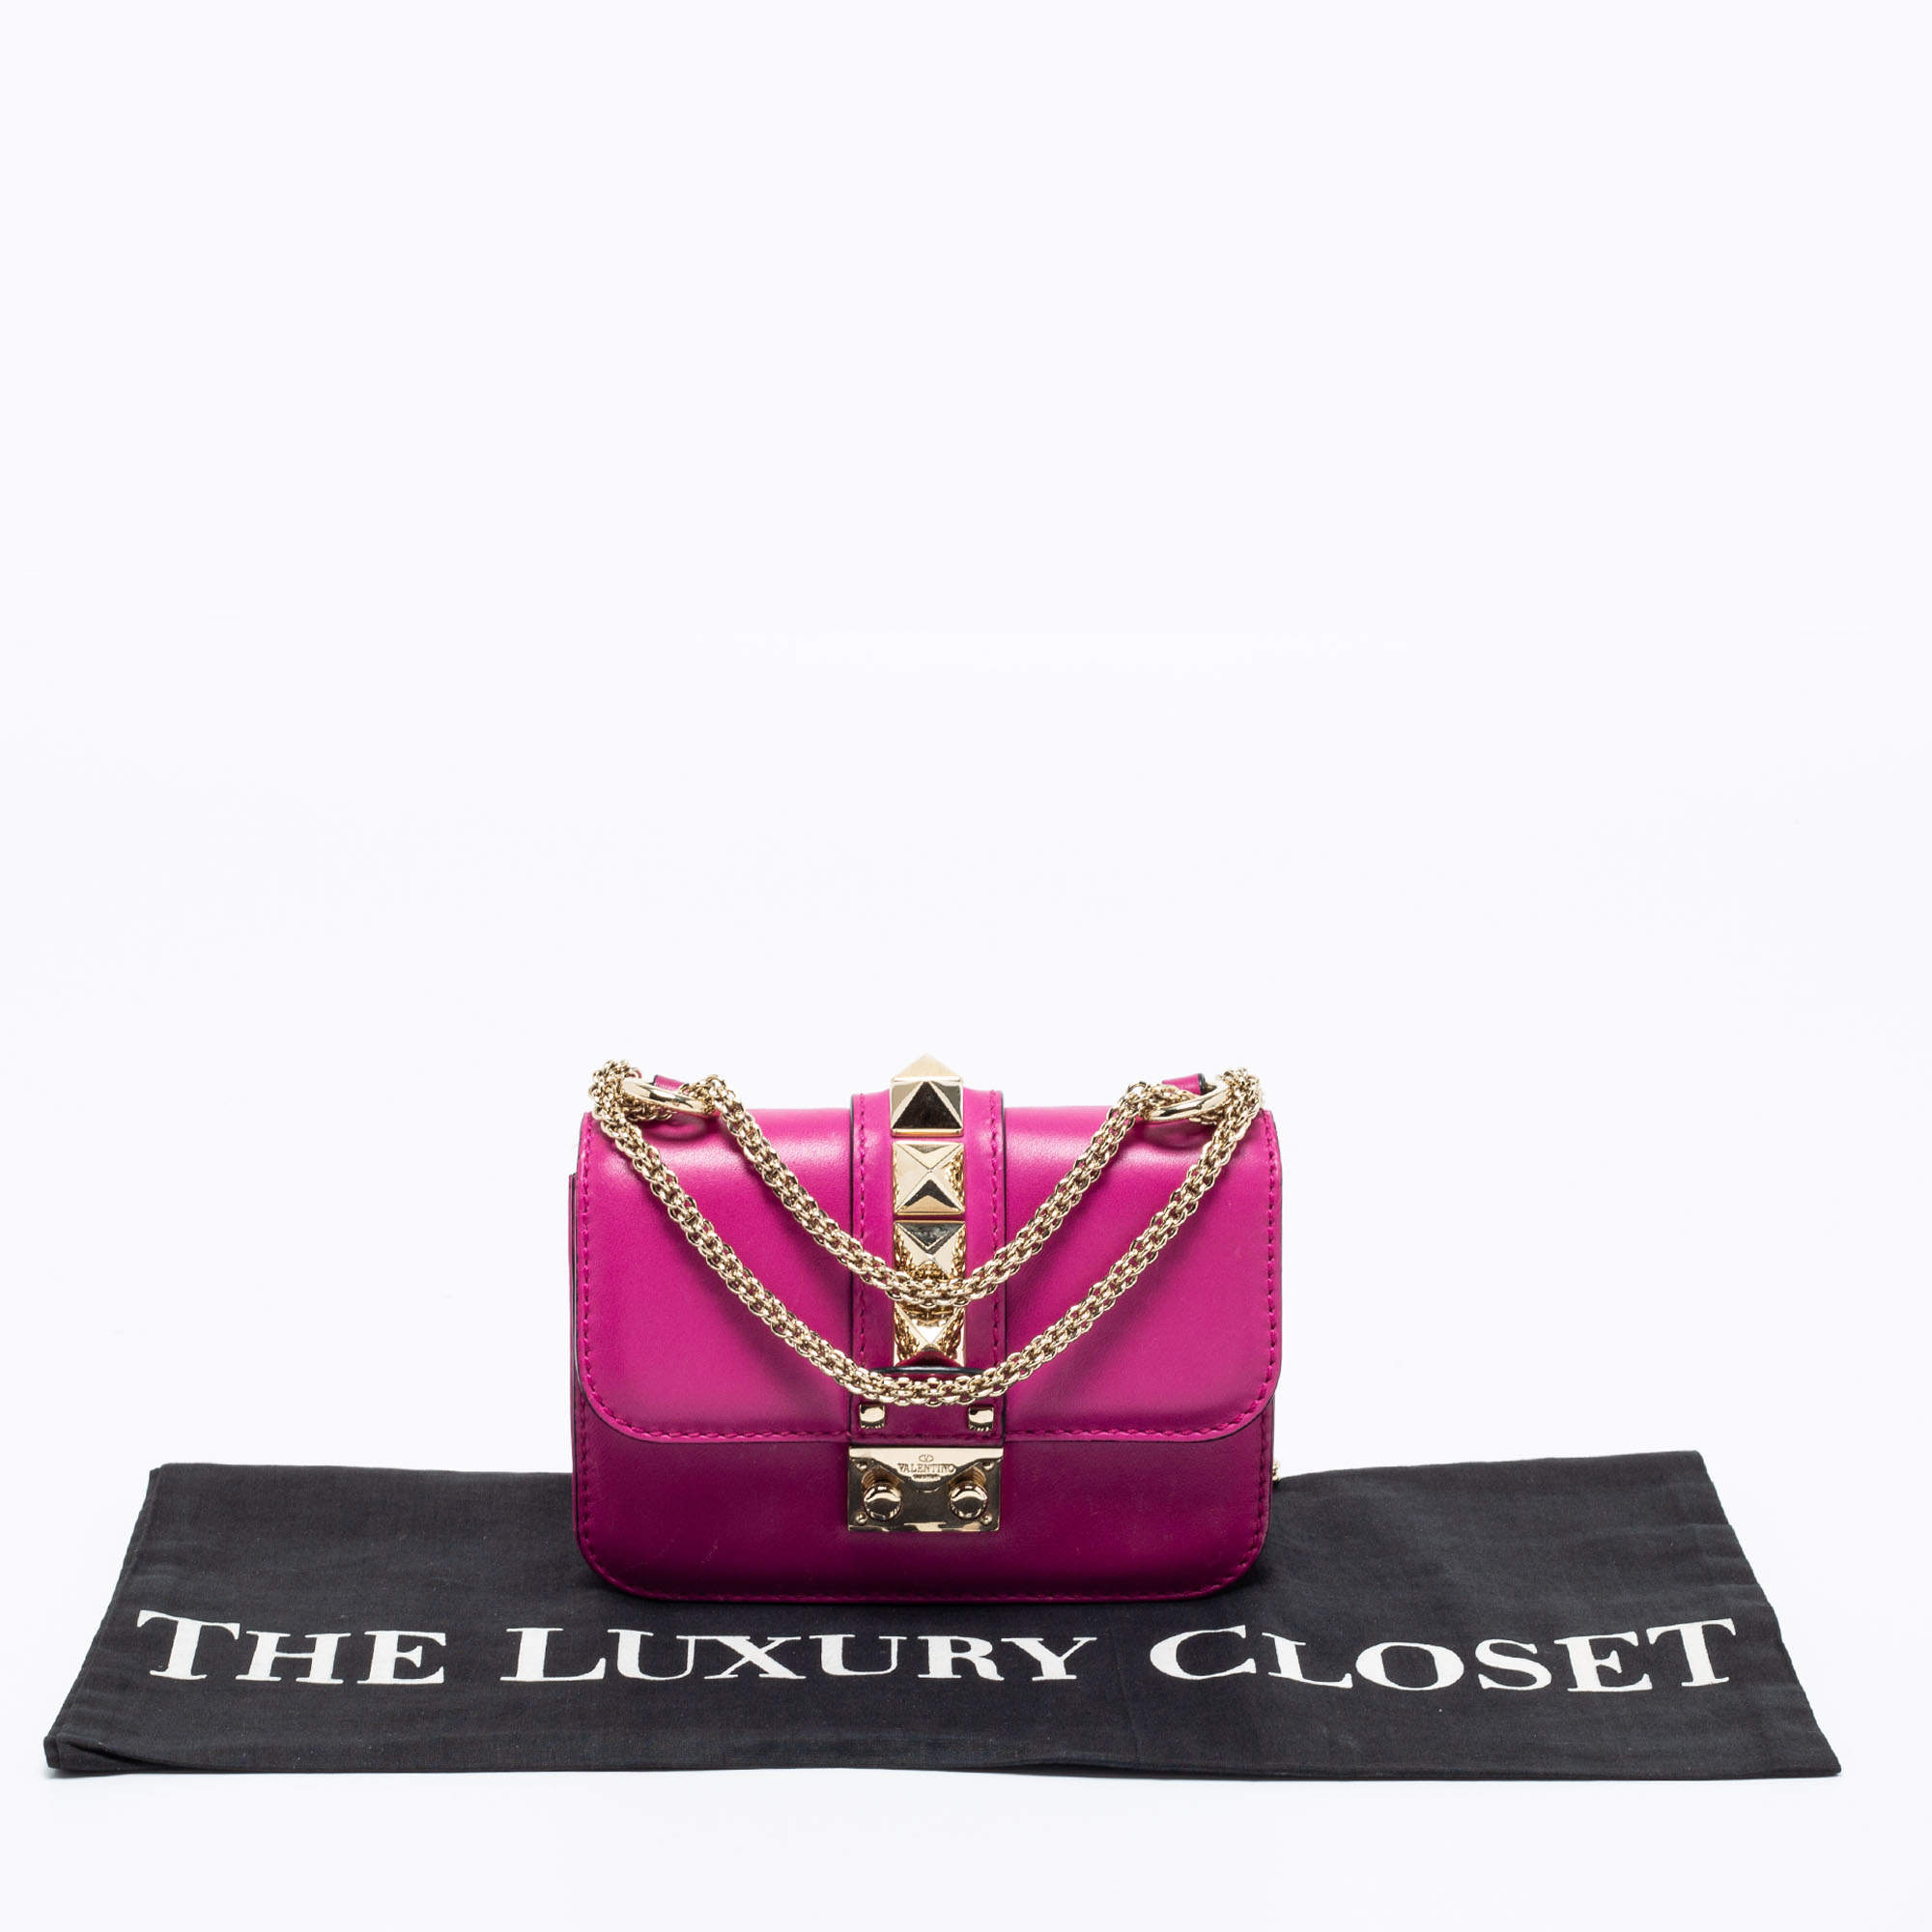 Valentino Bag Fuchsia Bag Leather Appliques Gold Rock Studs – Mightychic